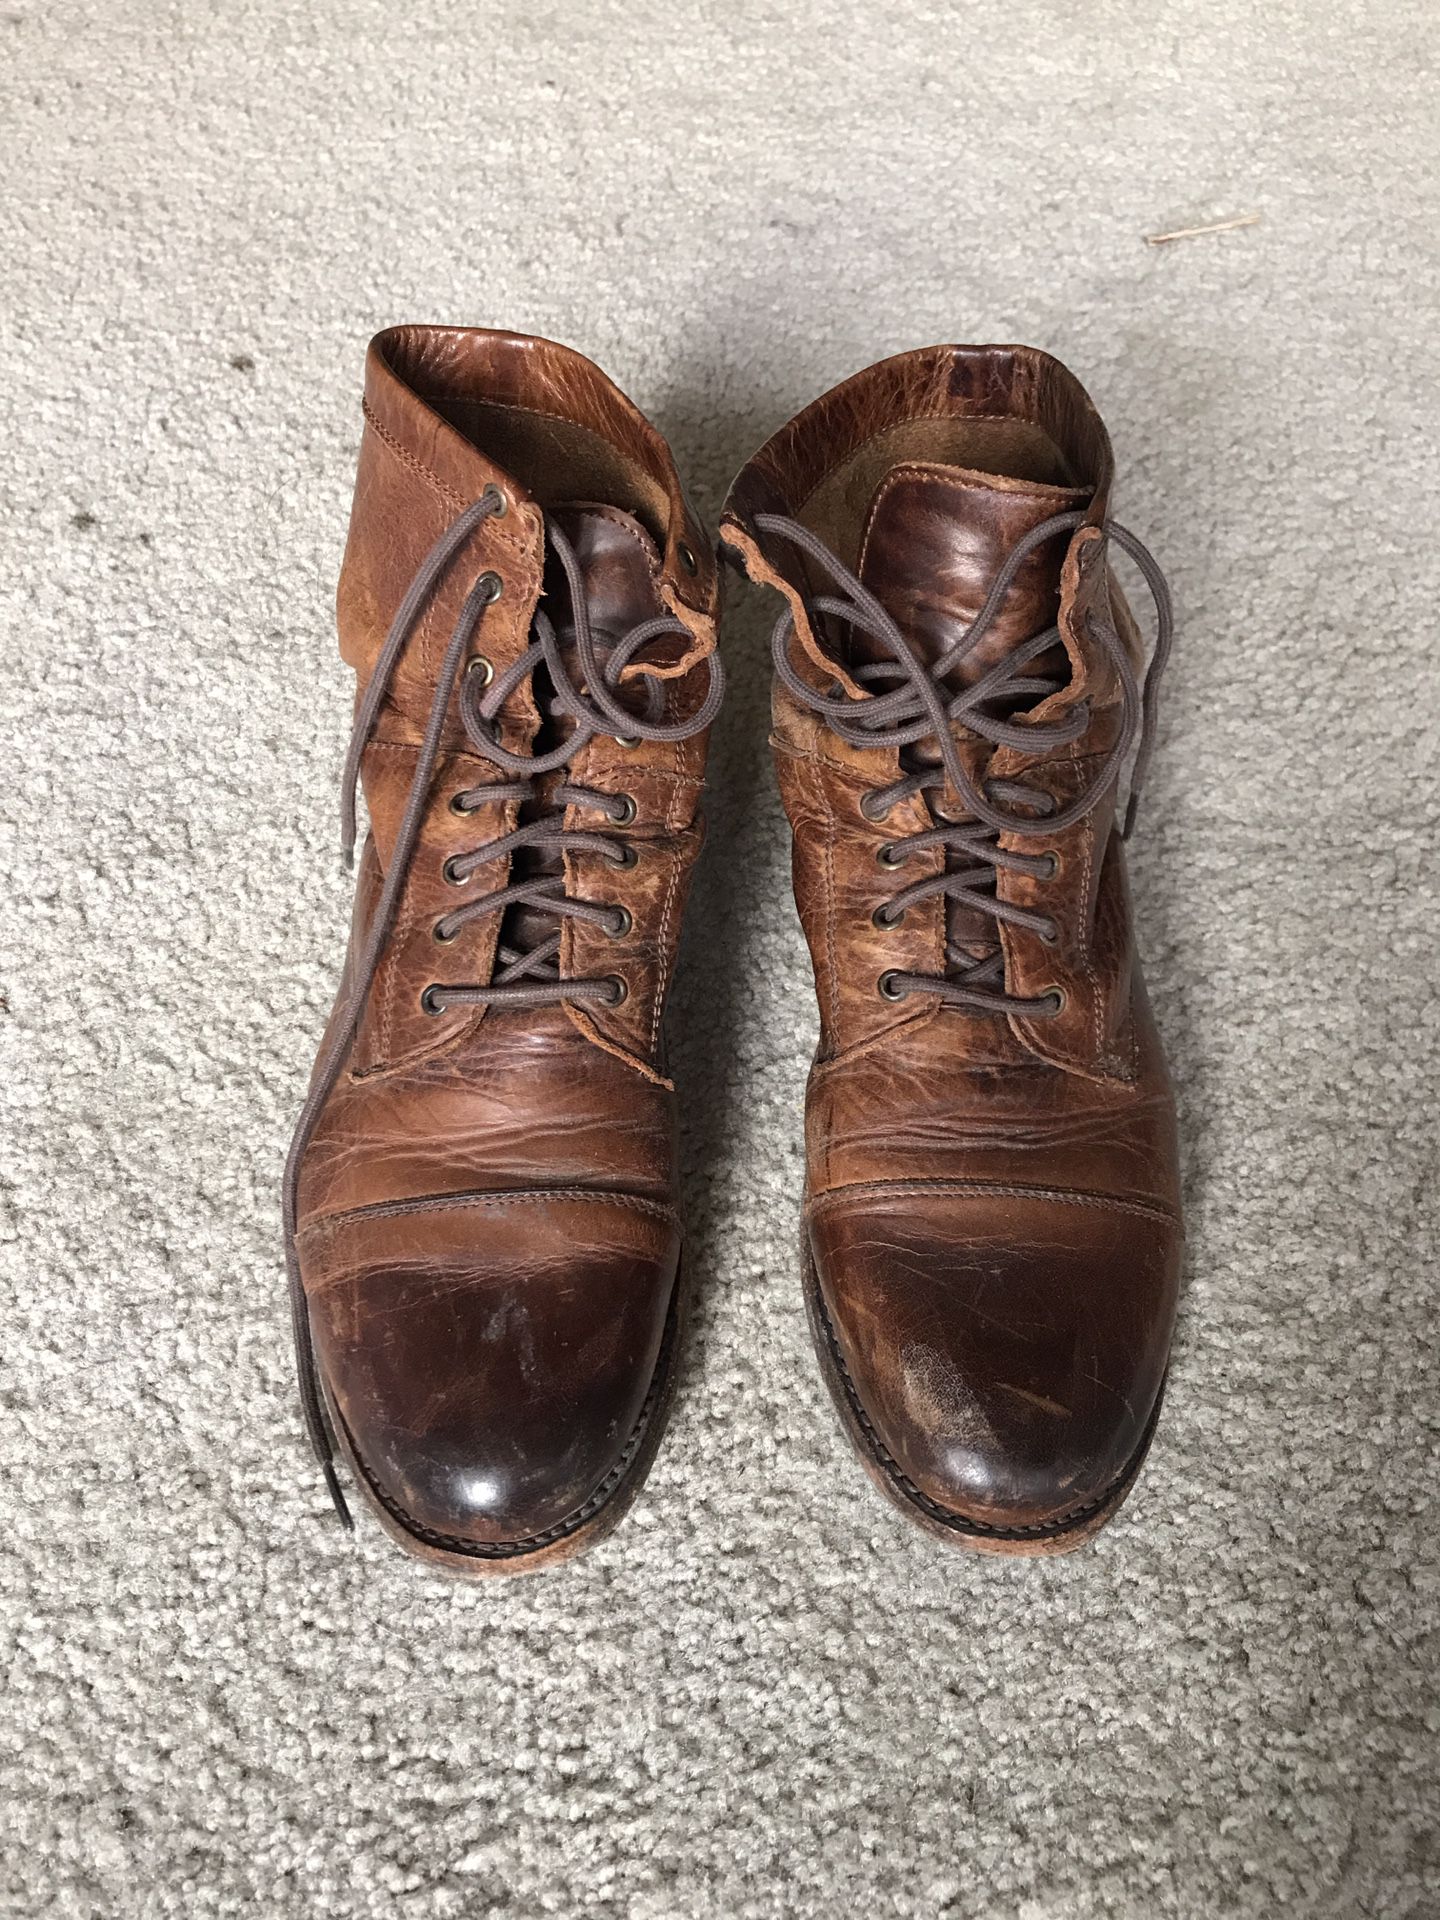 Frye Women’s Lace-up Erin Lug Work Boots - size 8